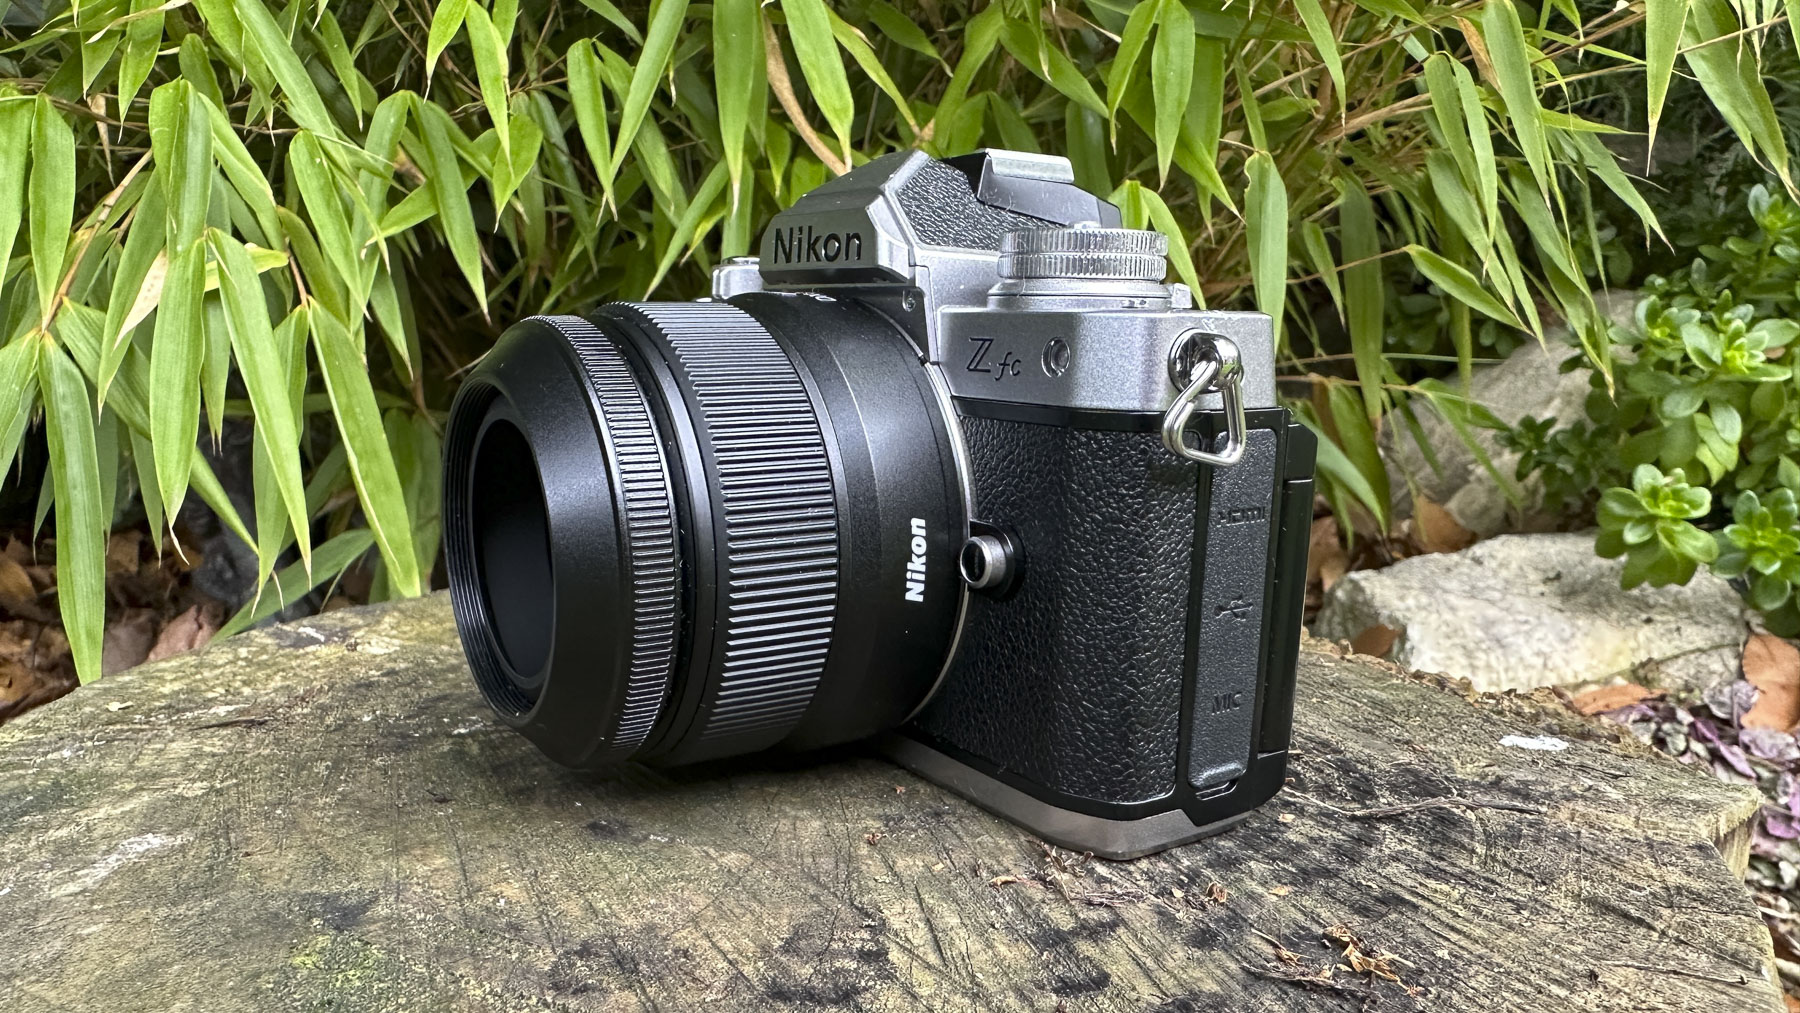 Nikkor Z DX 24mm f/1.7 lens side view with the lens mounted on a Nikon Z fc camera